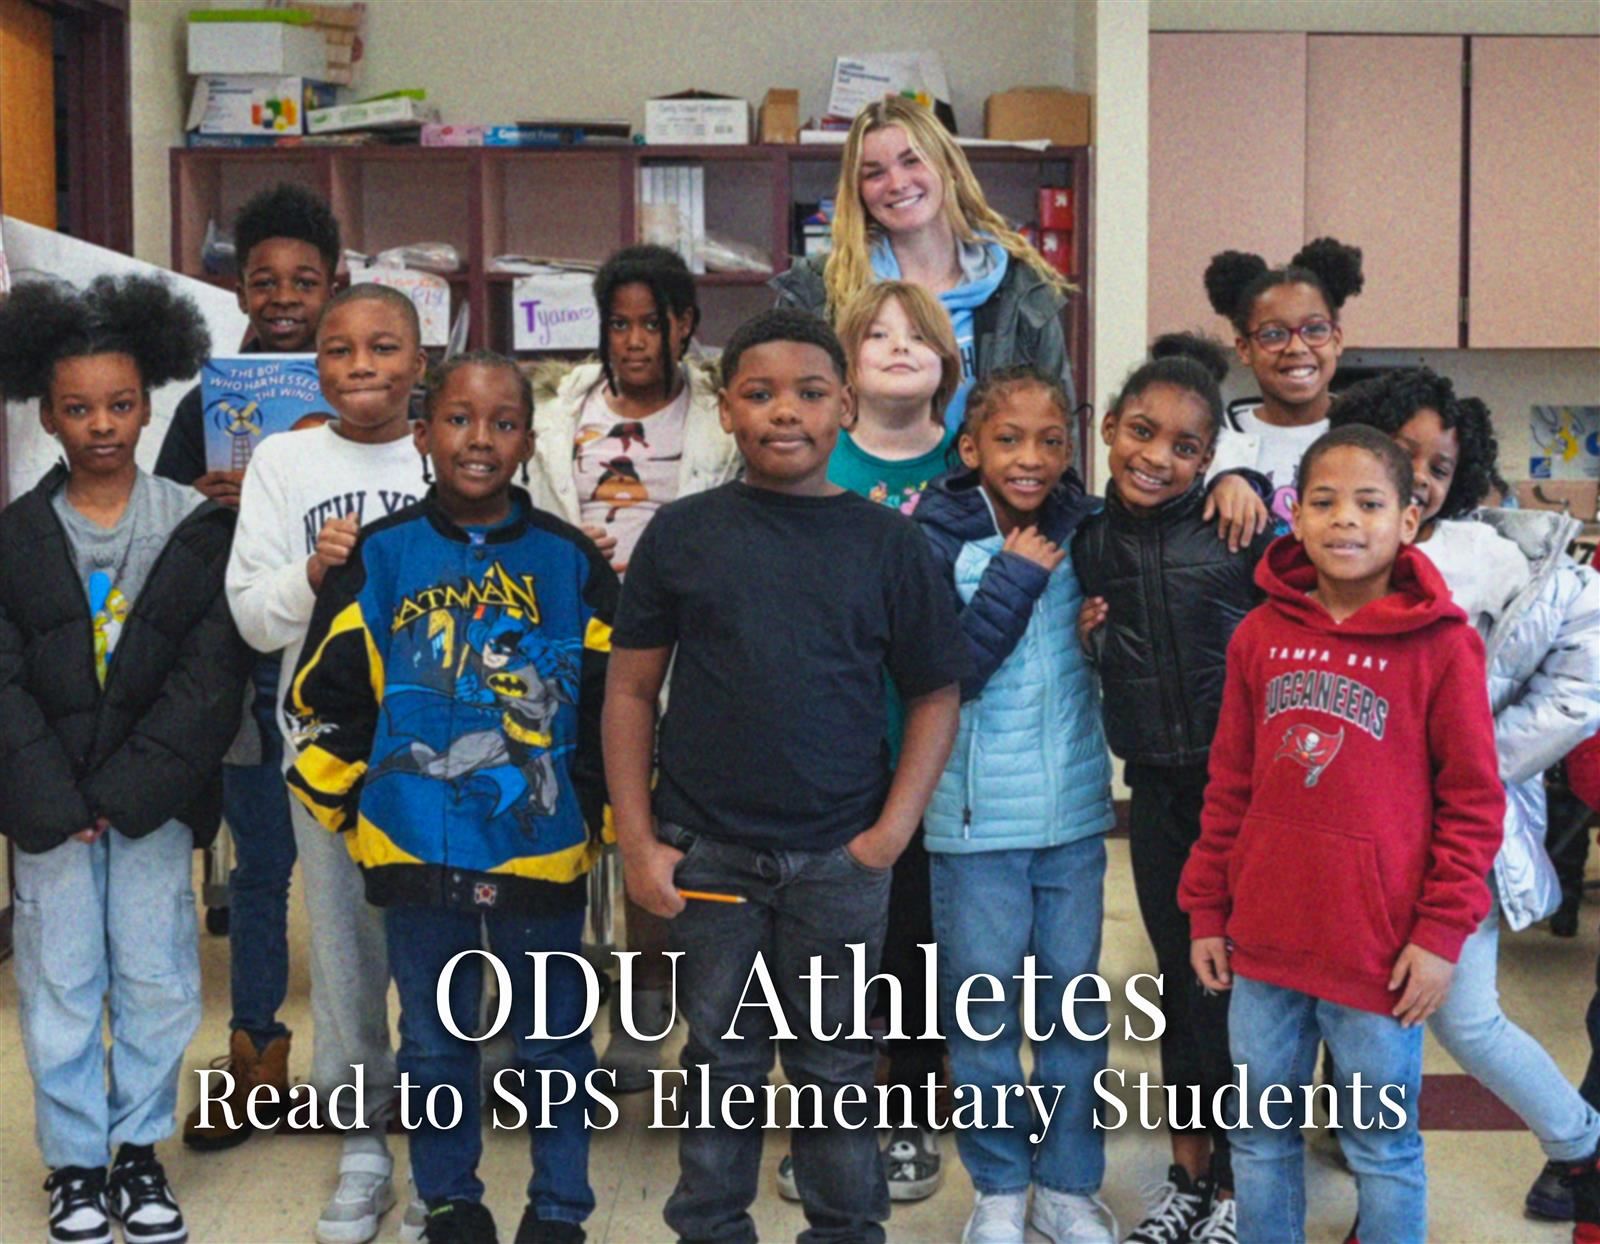  ODU Athletes Read to SPS Elementary Students